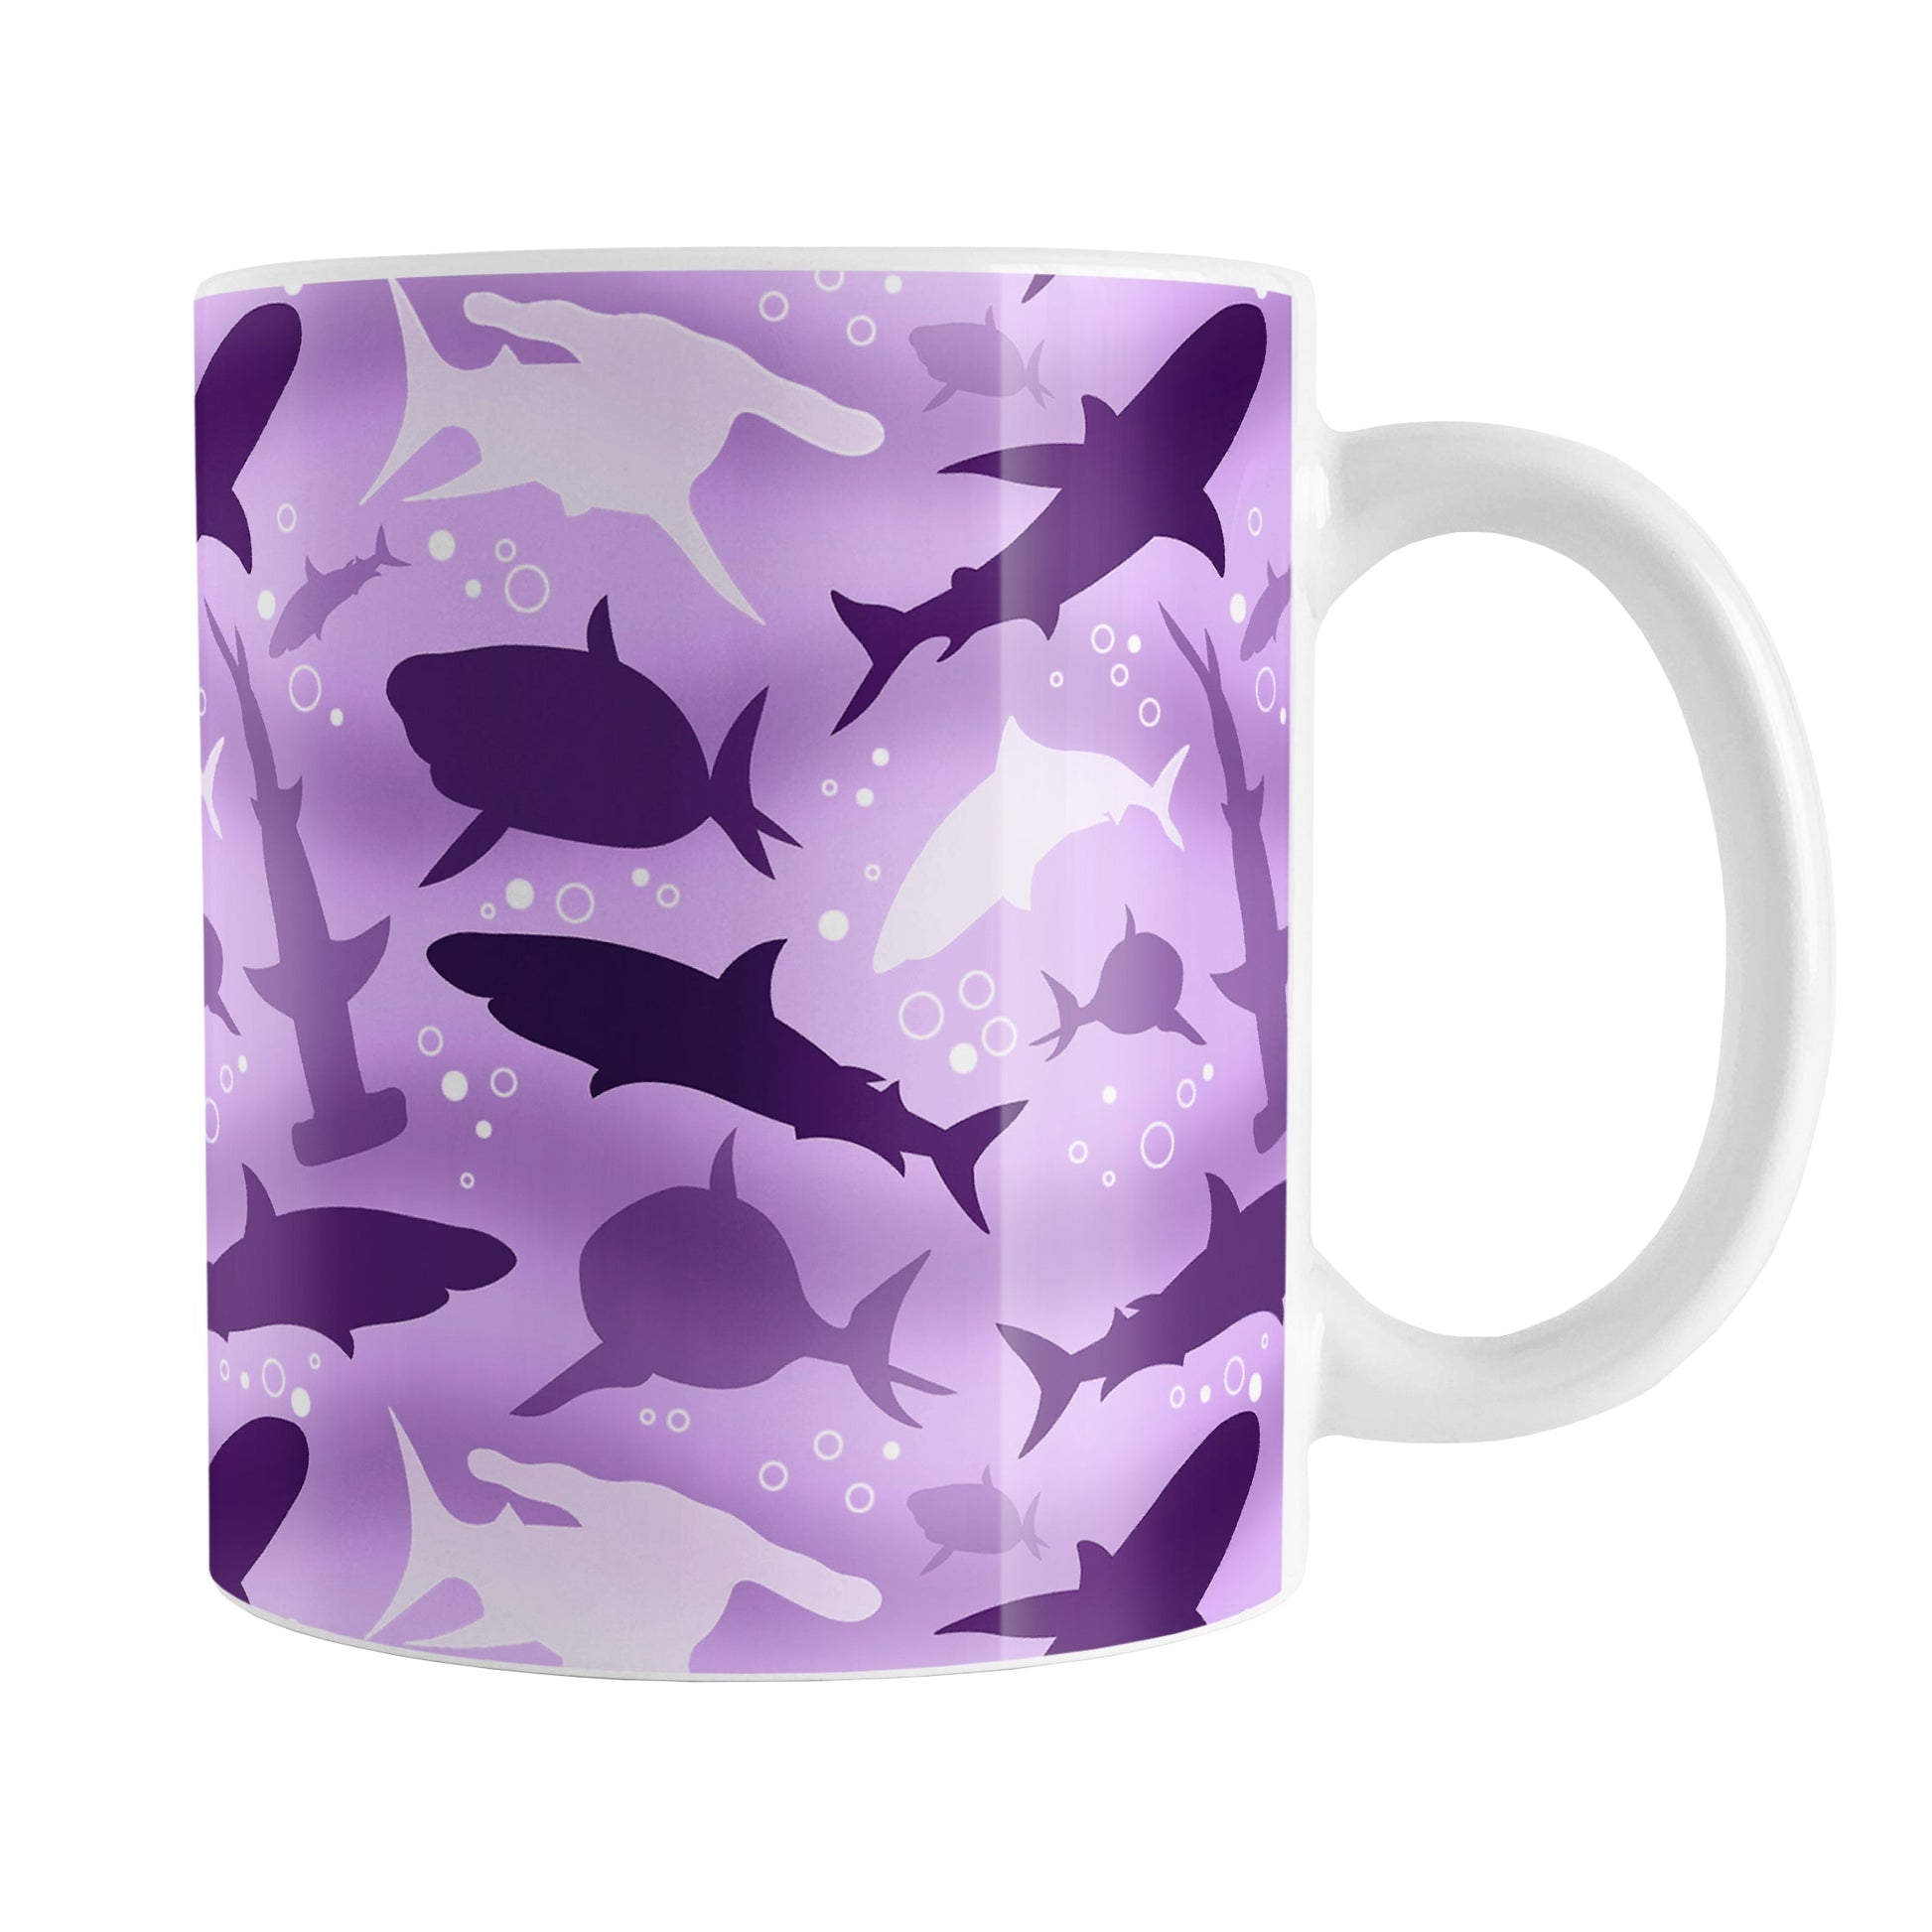 Purple Frenzy Sharks Mug (11oz) at Amy's Coffee Mugs. A ceramic coffee mug designed with a pattern of sharks in different shades of purple, in a frenzy deep beneath the purple water background, that wraps around the mug to the handle. Perfect for people who love sharks and the color purple.